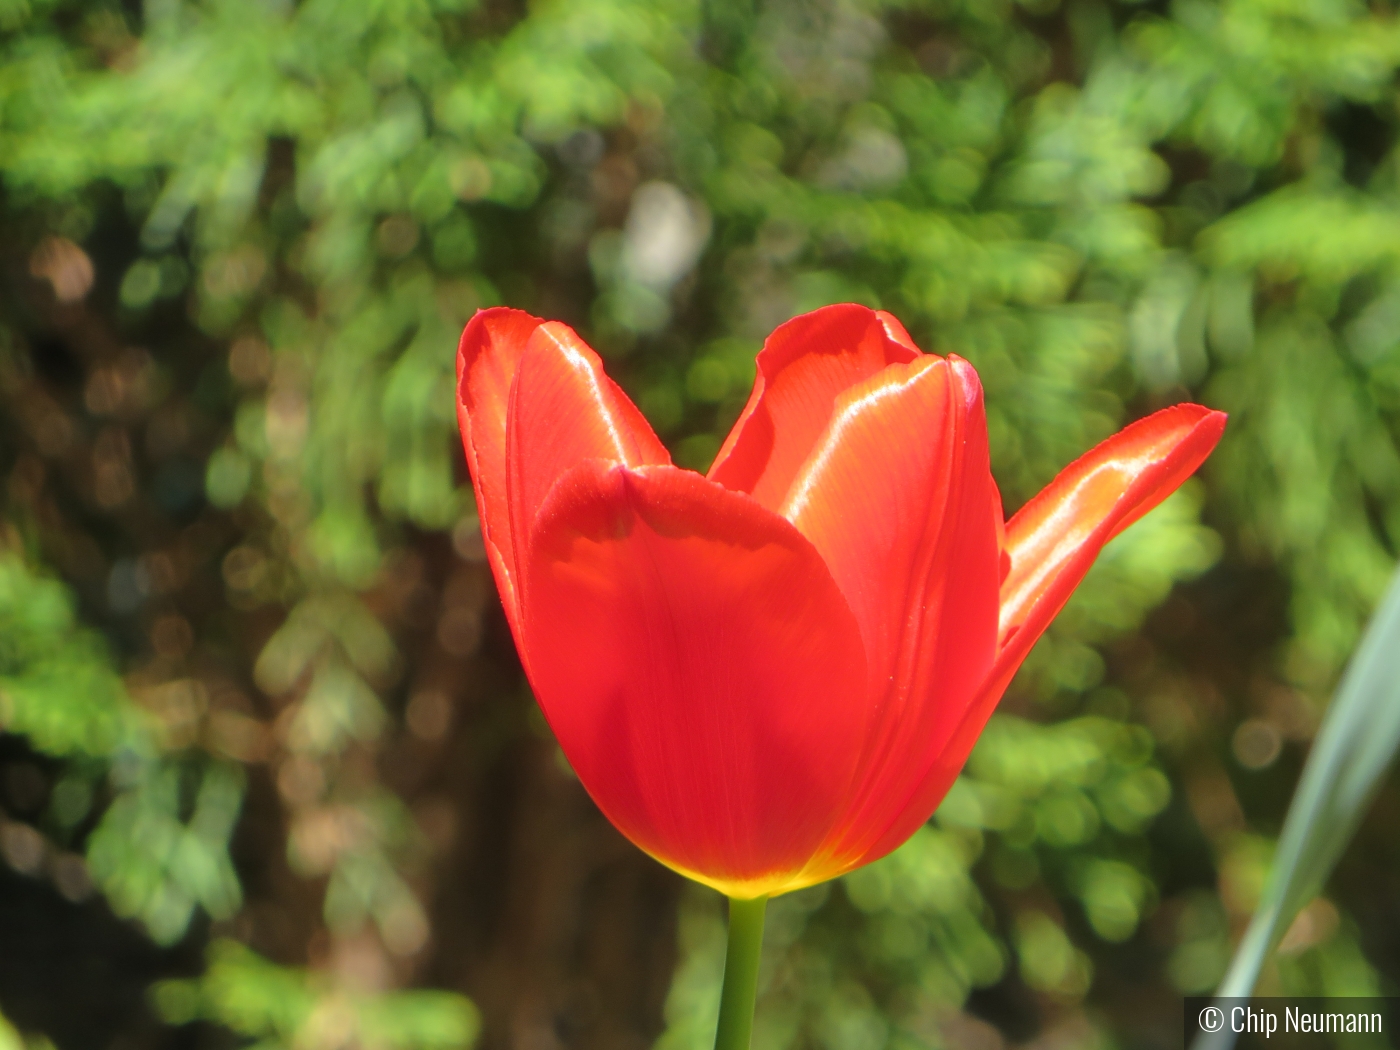 Red Tulip in Late Spring by Chip Neumann